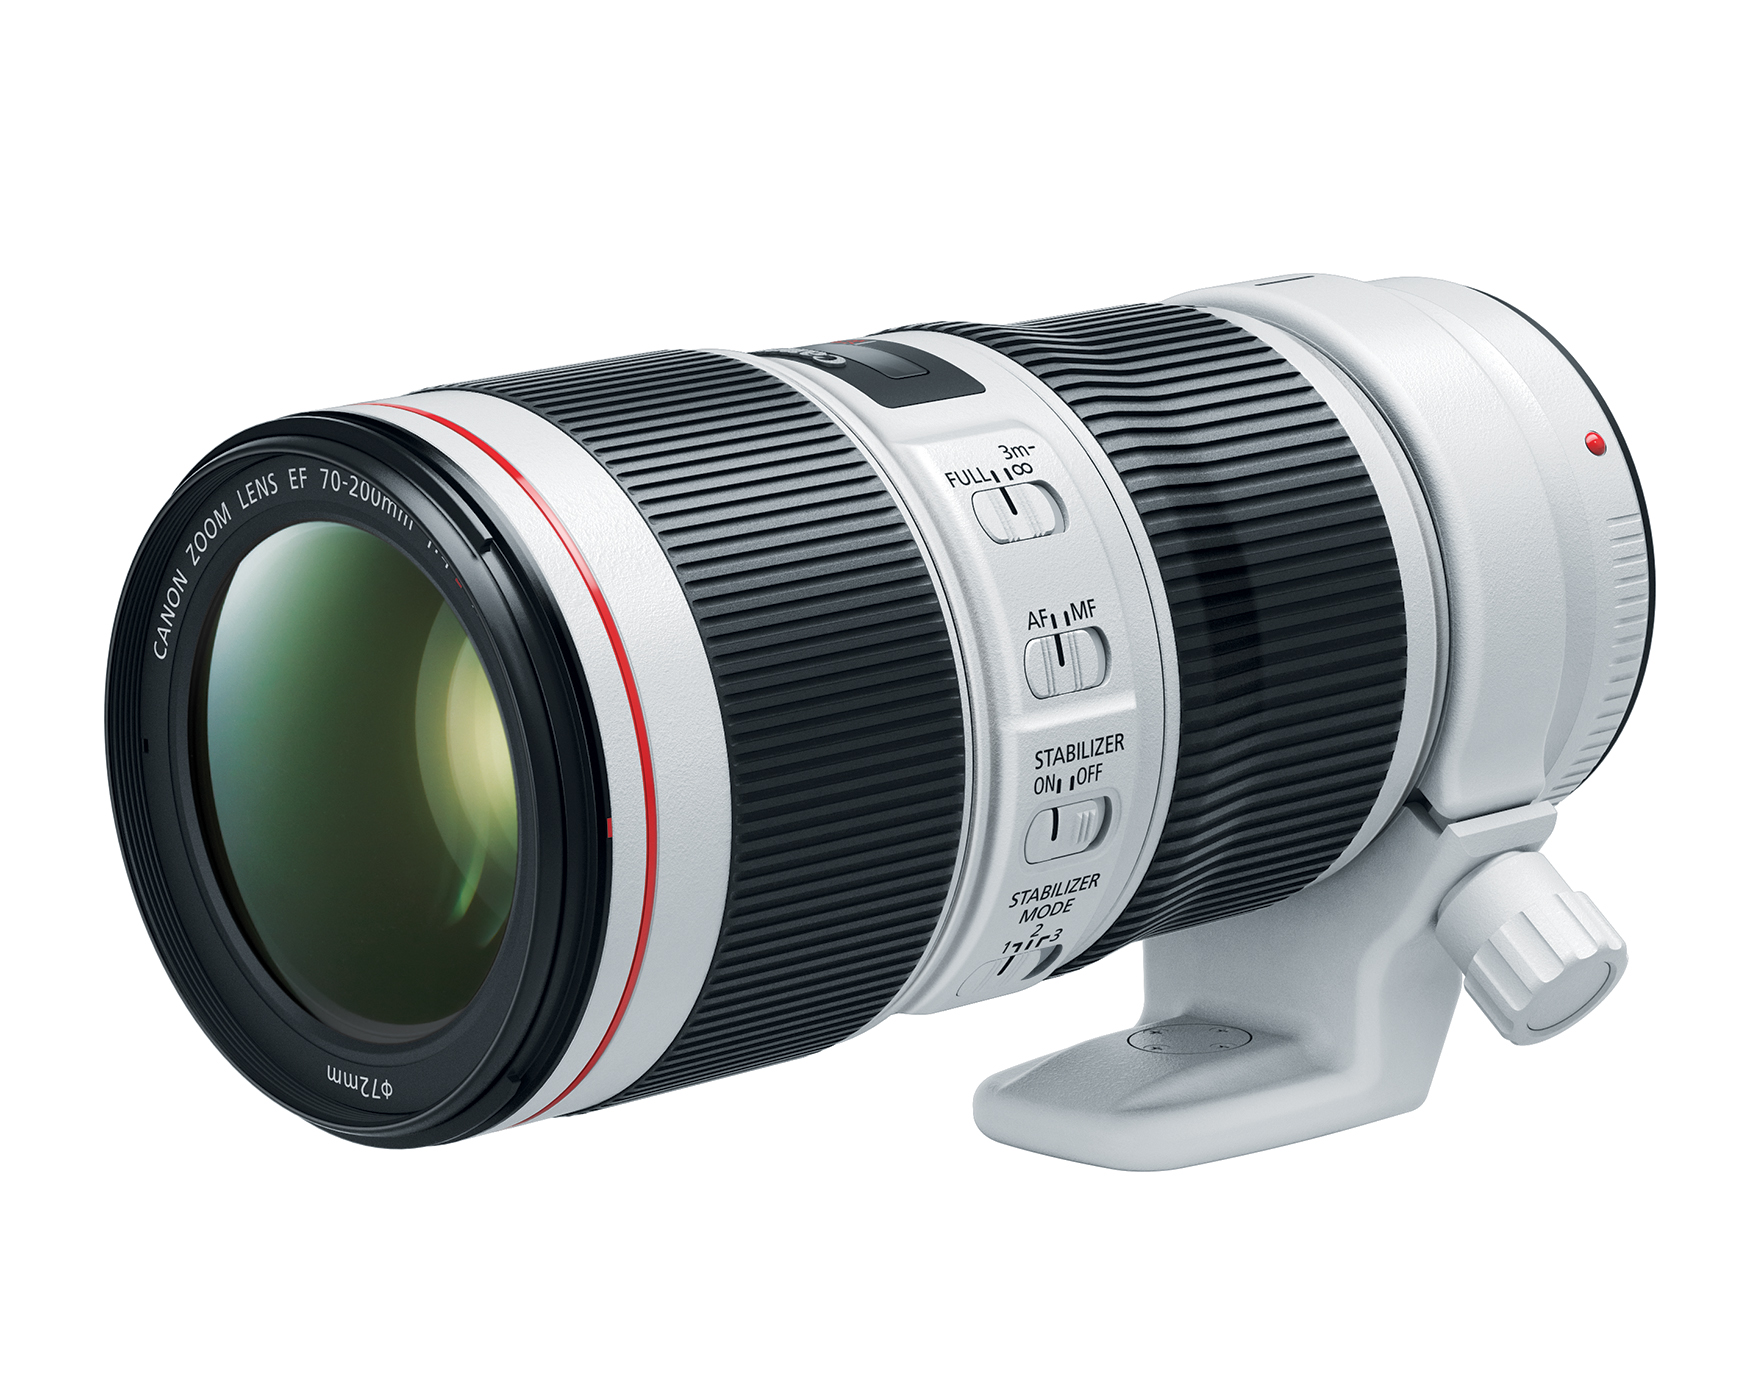 The New Canon 70-200mm Lens Updates are Very Perplexing